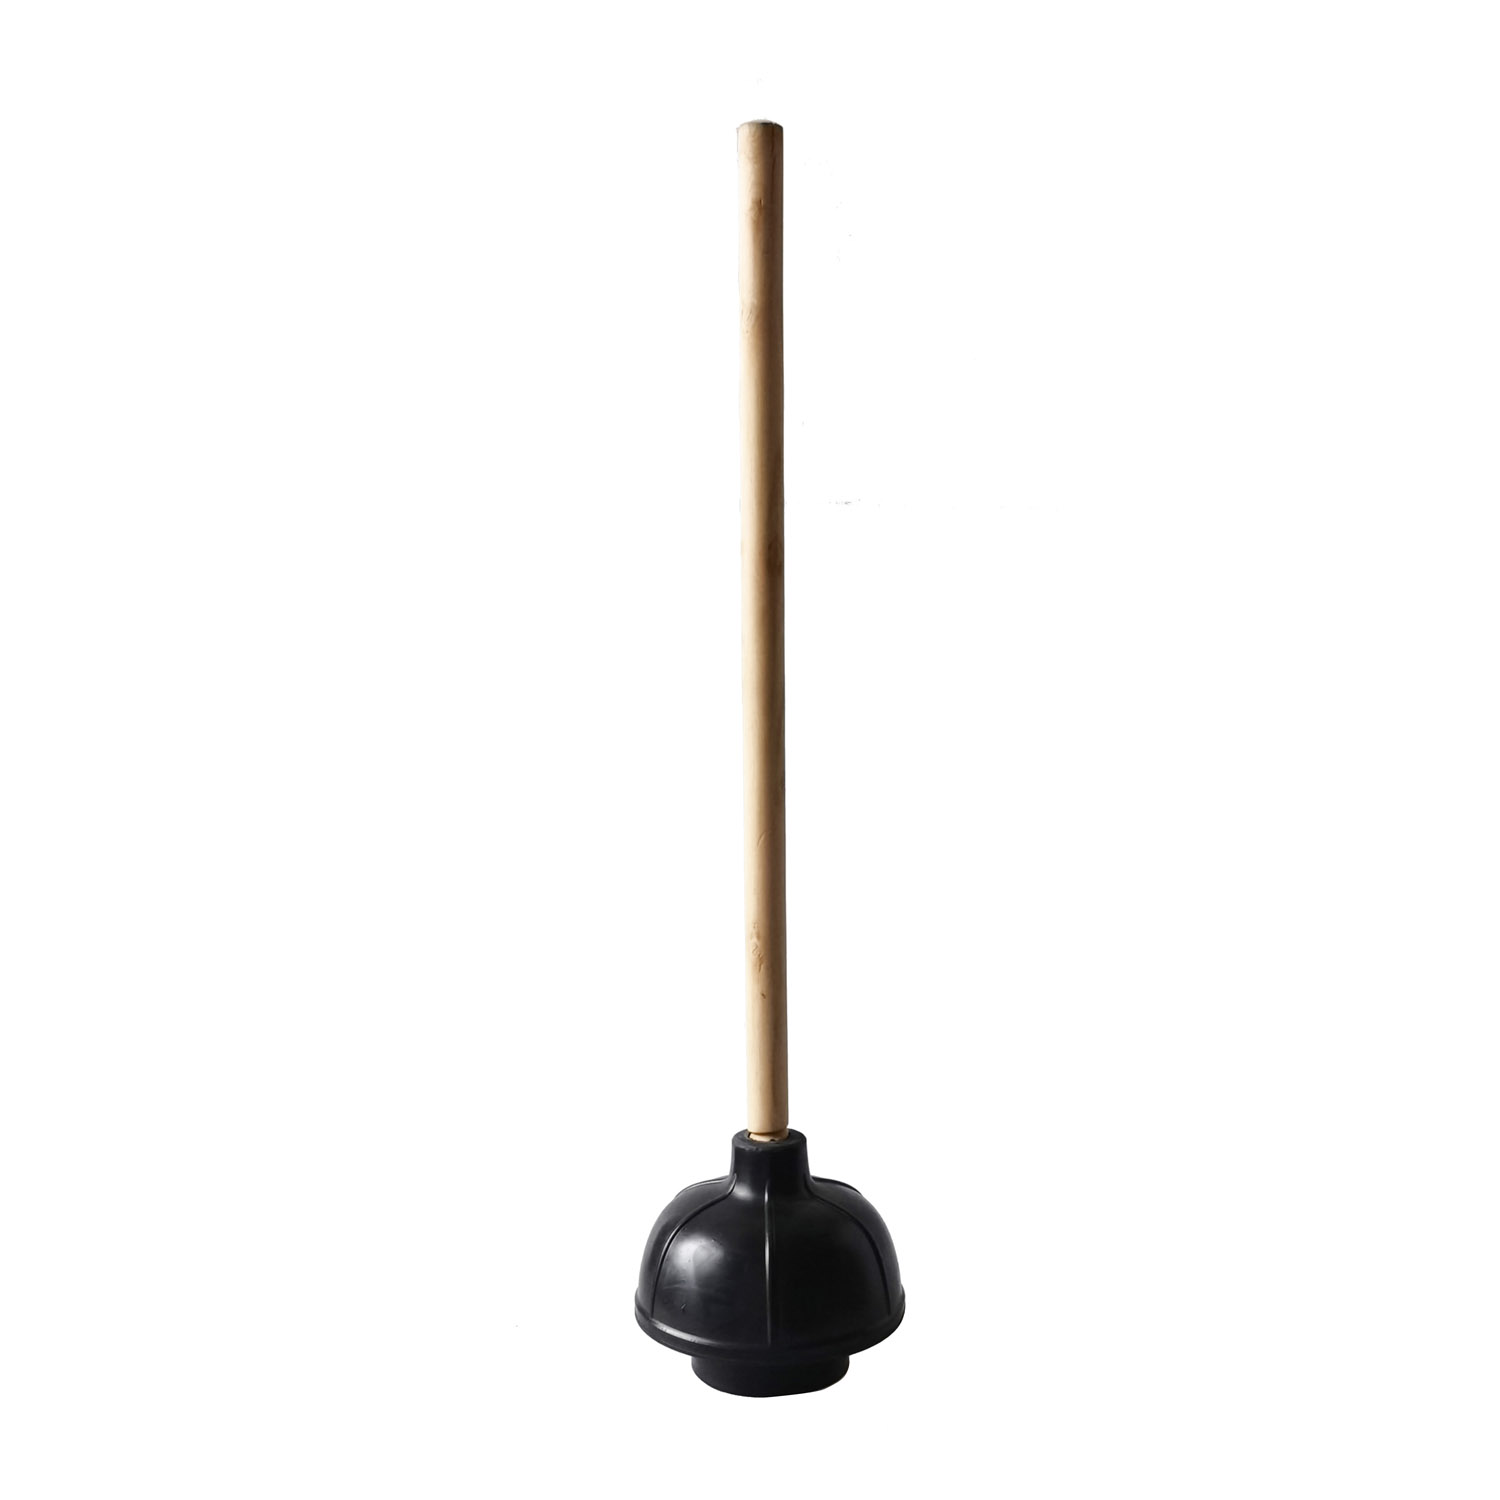 CAC China PLGW-24 Rubber Plunger with Wooden Handle 24"